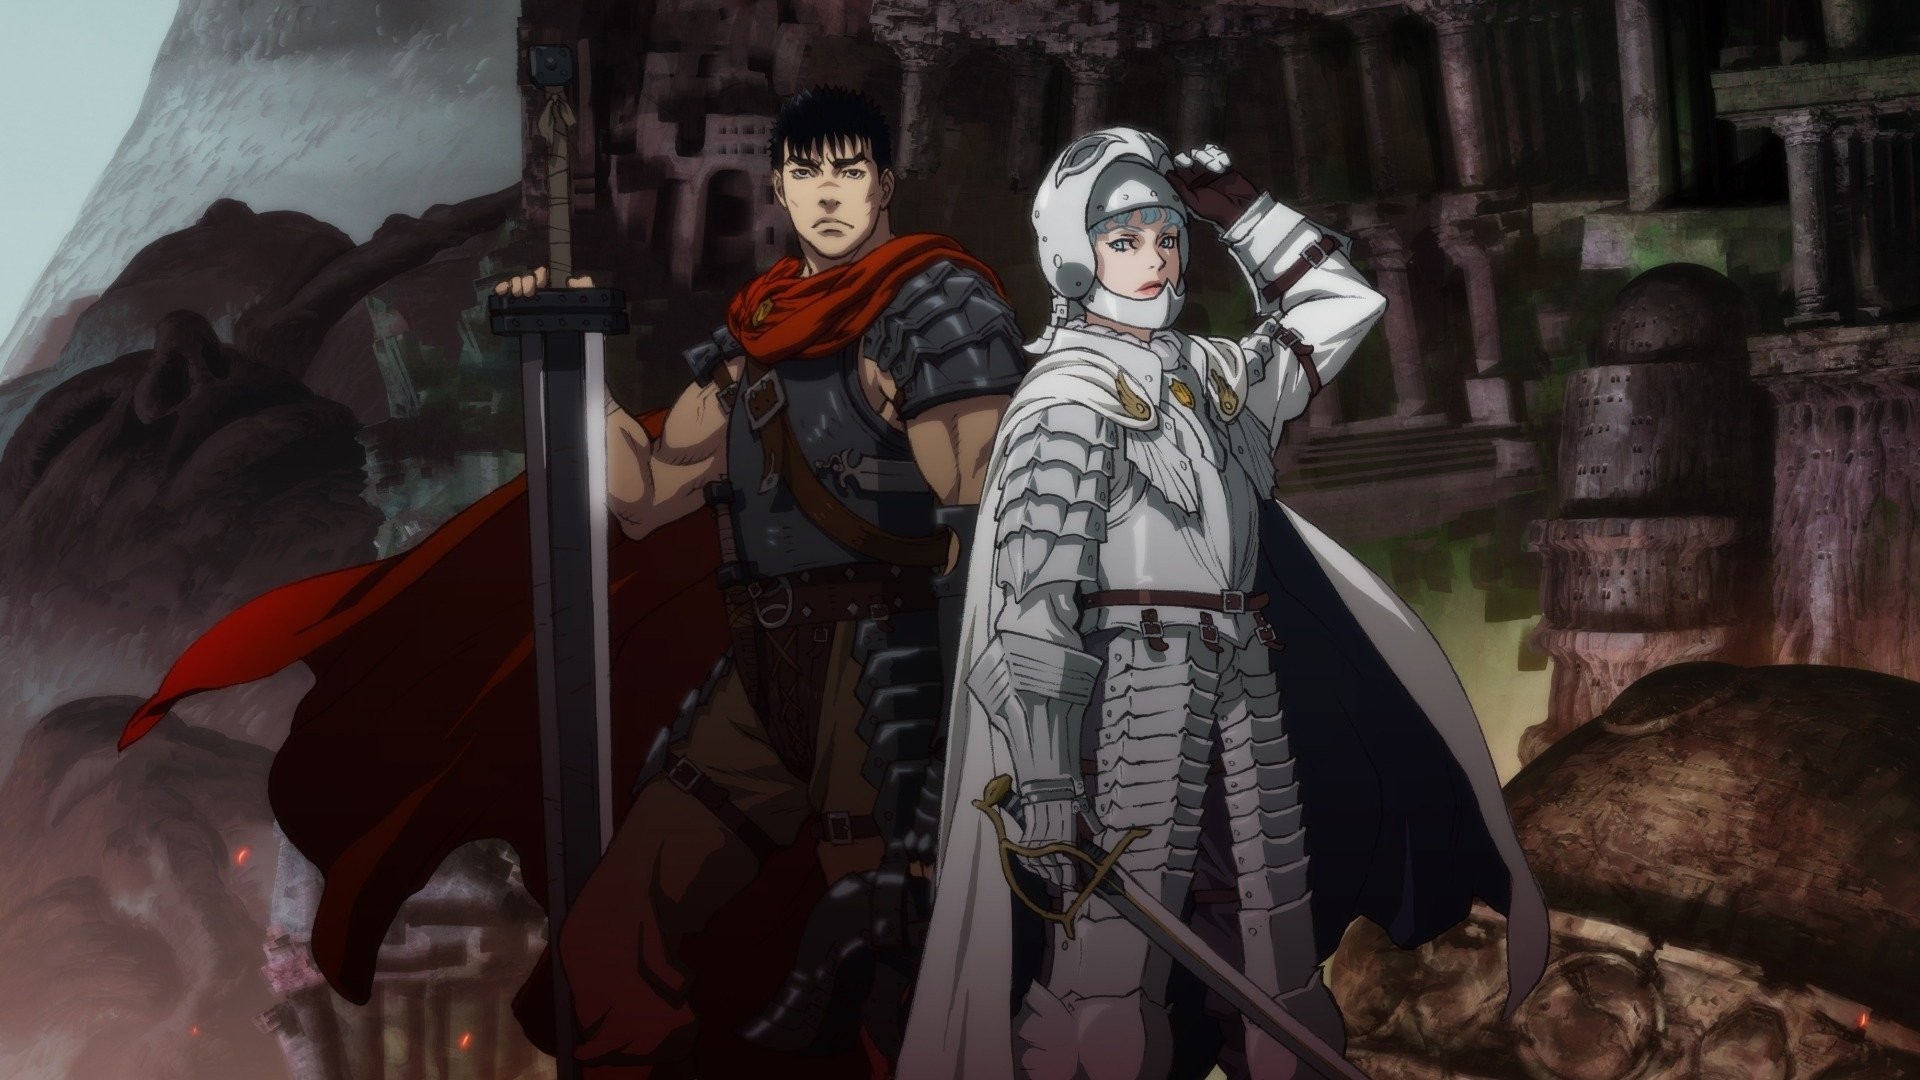 Reviews: Berserk: The Golden Age Arc I - The Egg of the King - IMDb